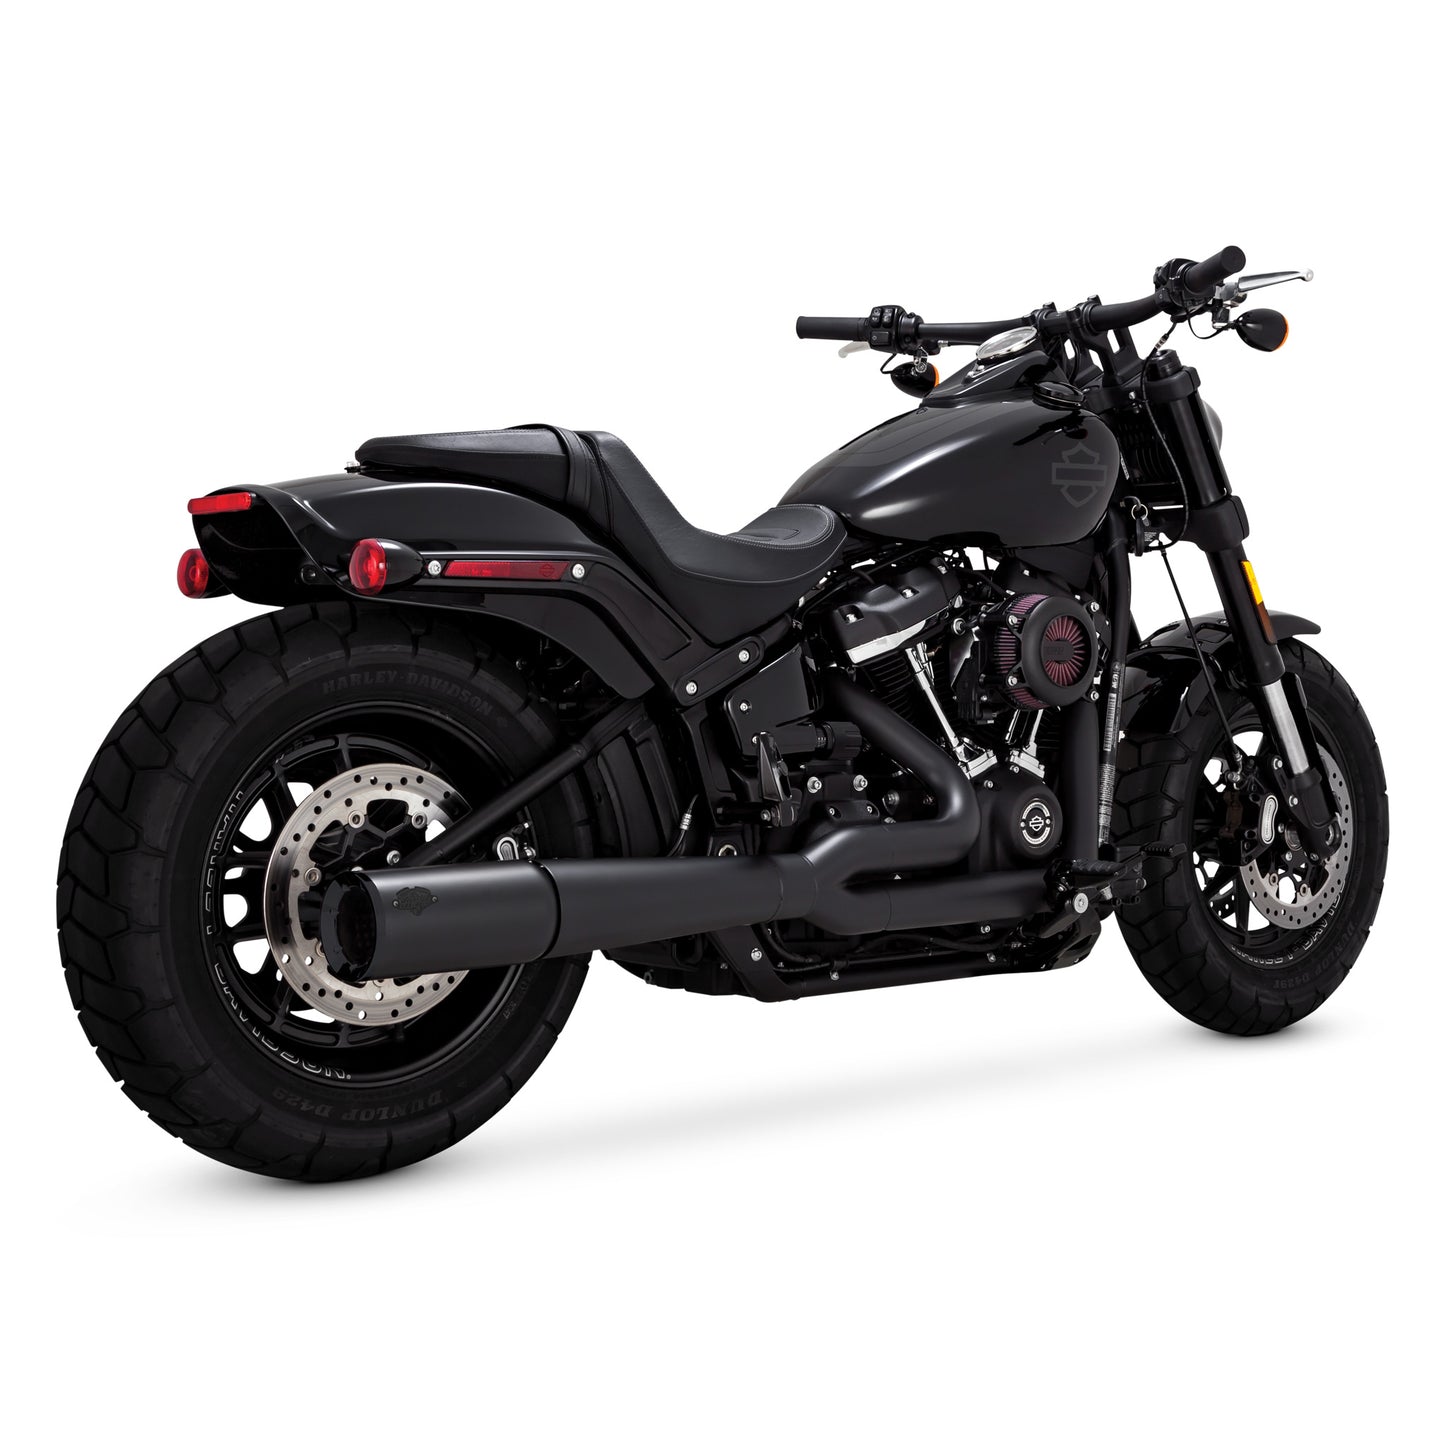 Mofles Vance & Hines Pro Pipe H-D Touring 2010 a 2016